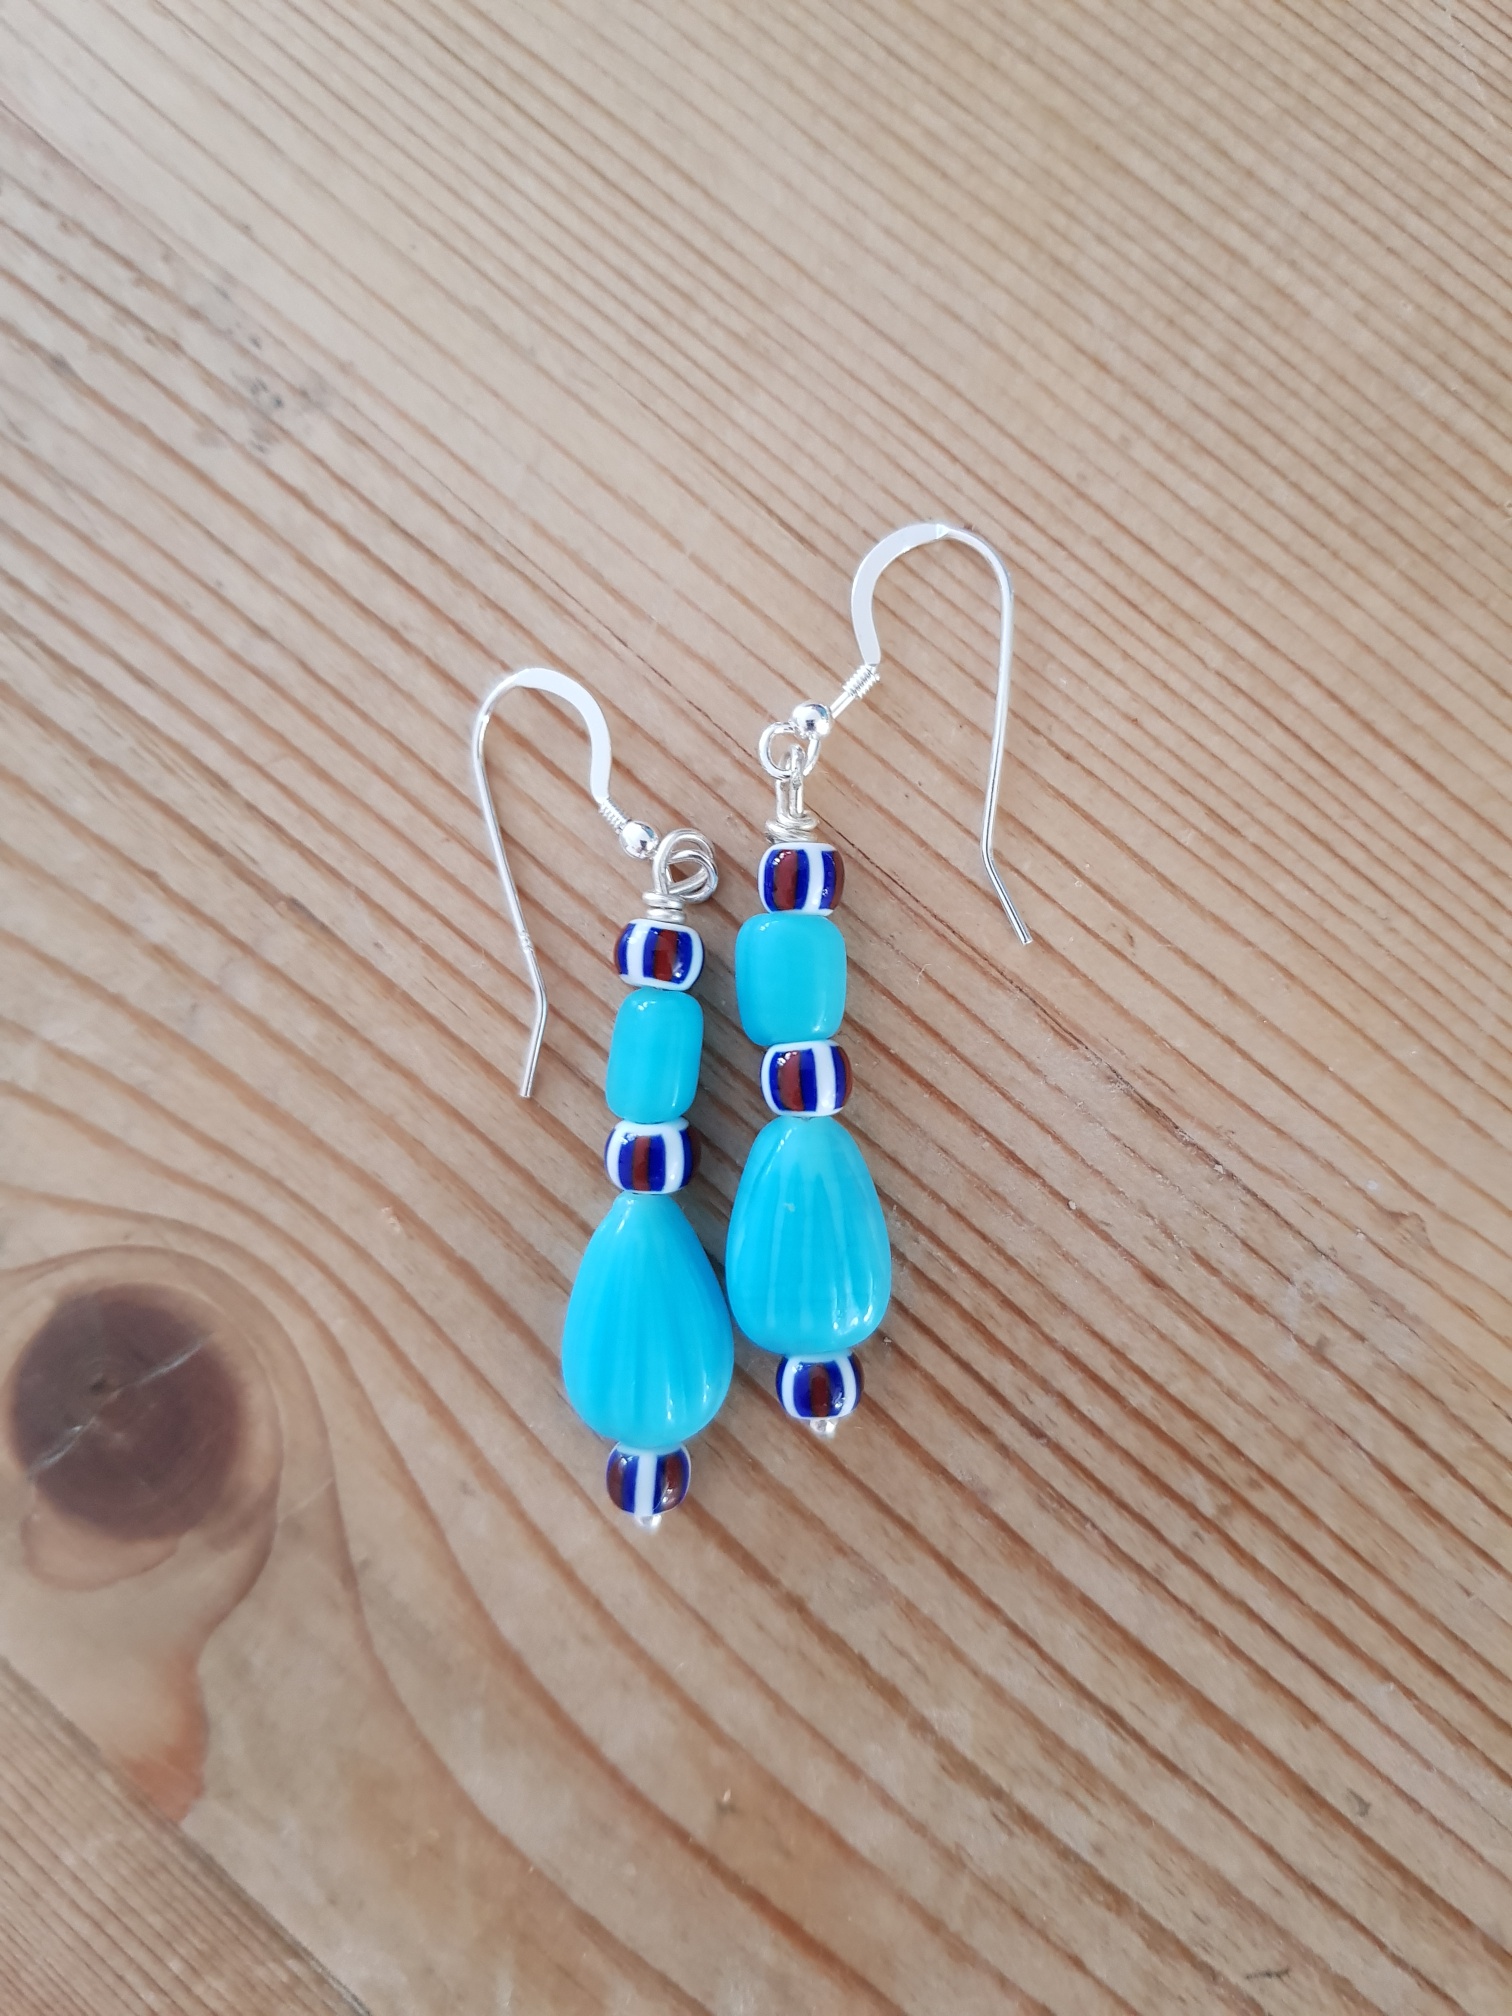 Make your own Silver and Beaded Earrings